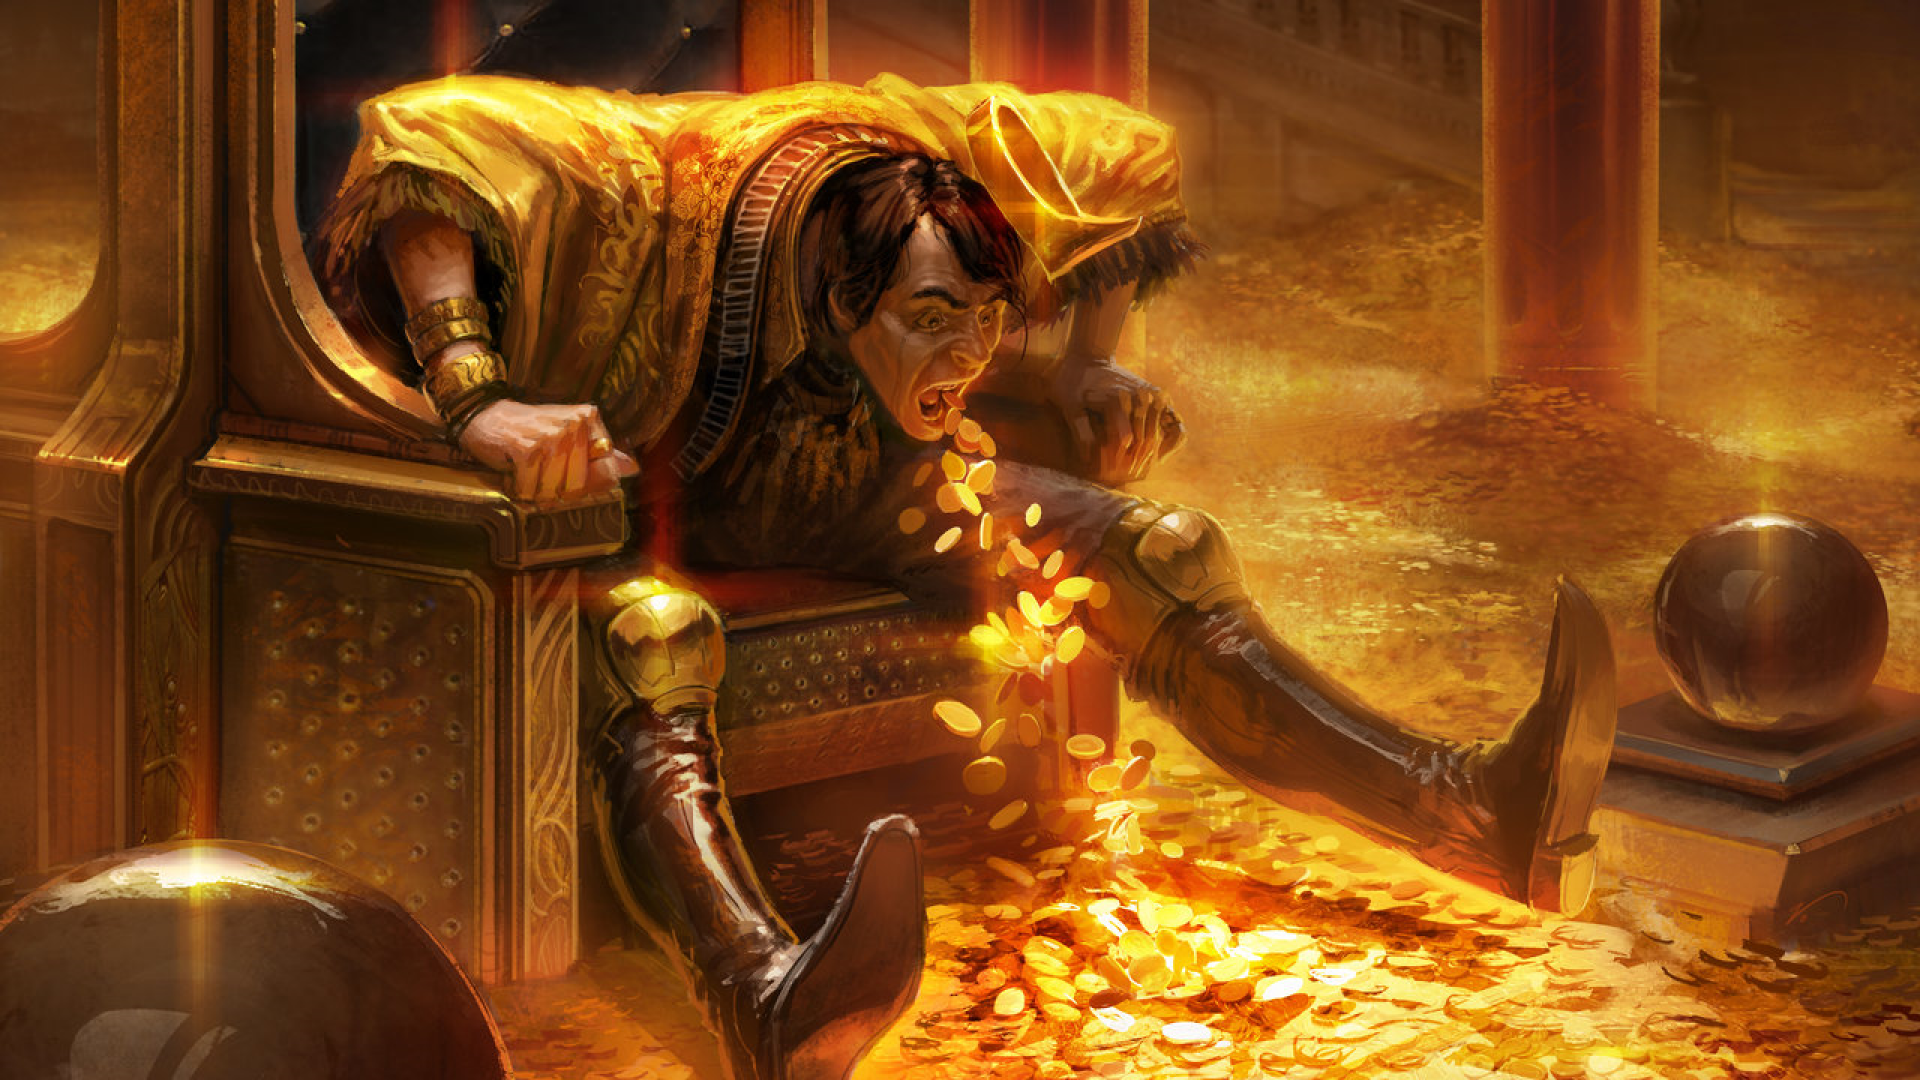 Card art for Greed from Magic: The Gathering